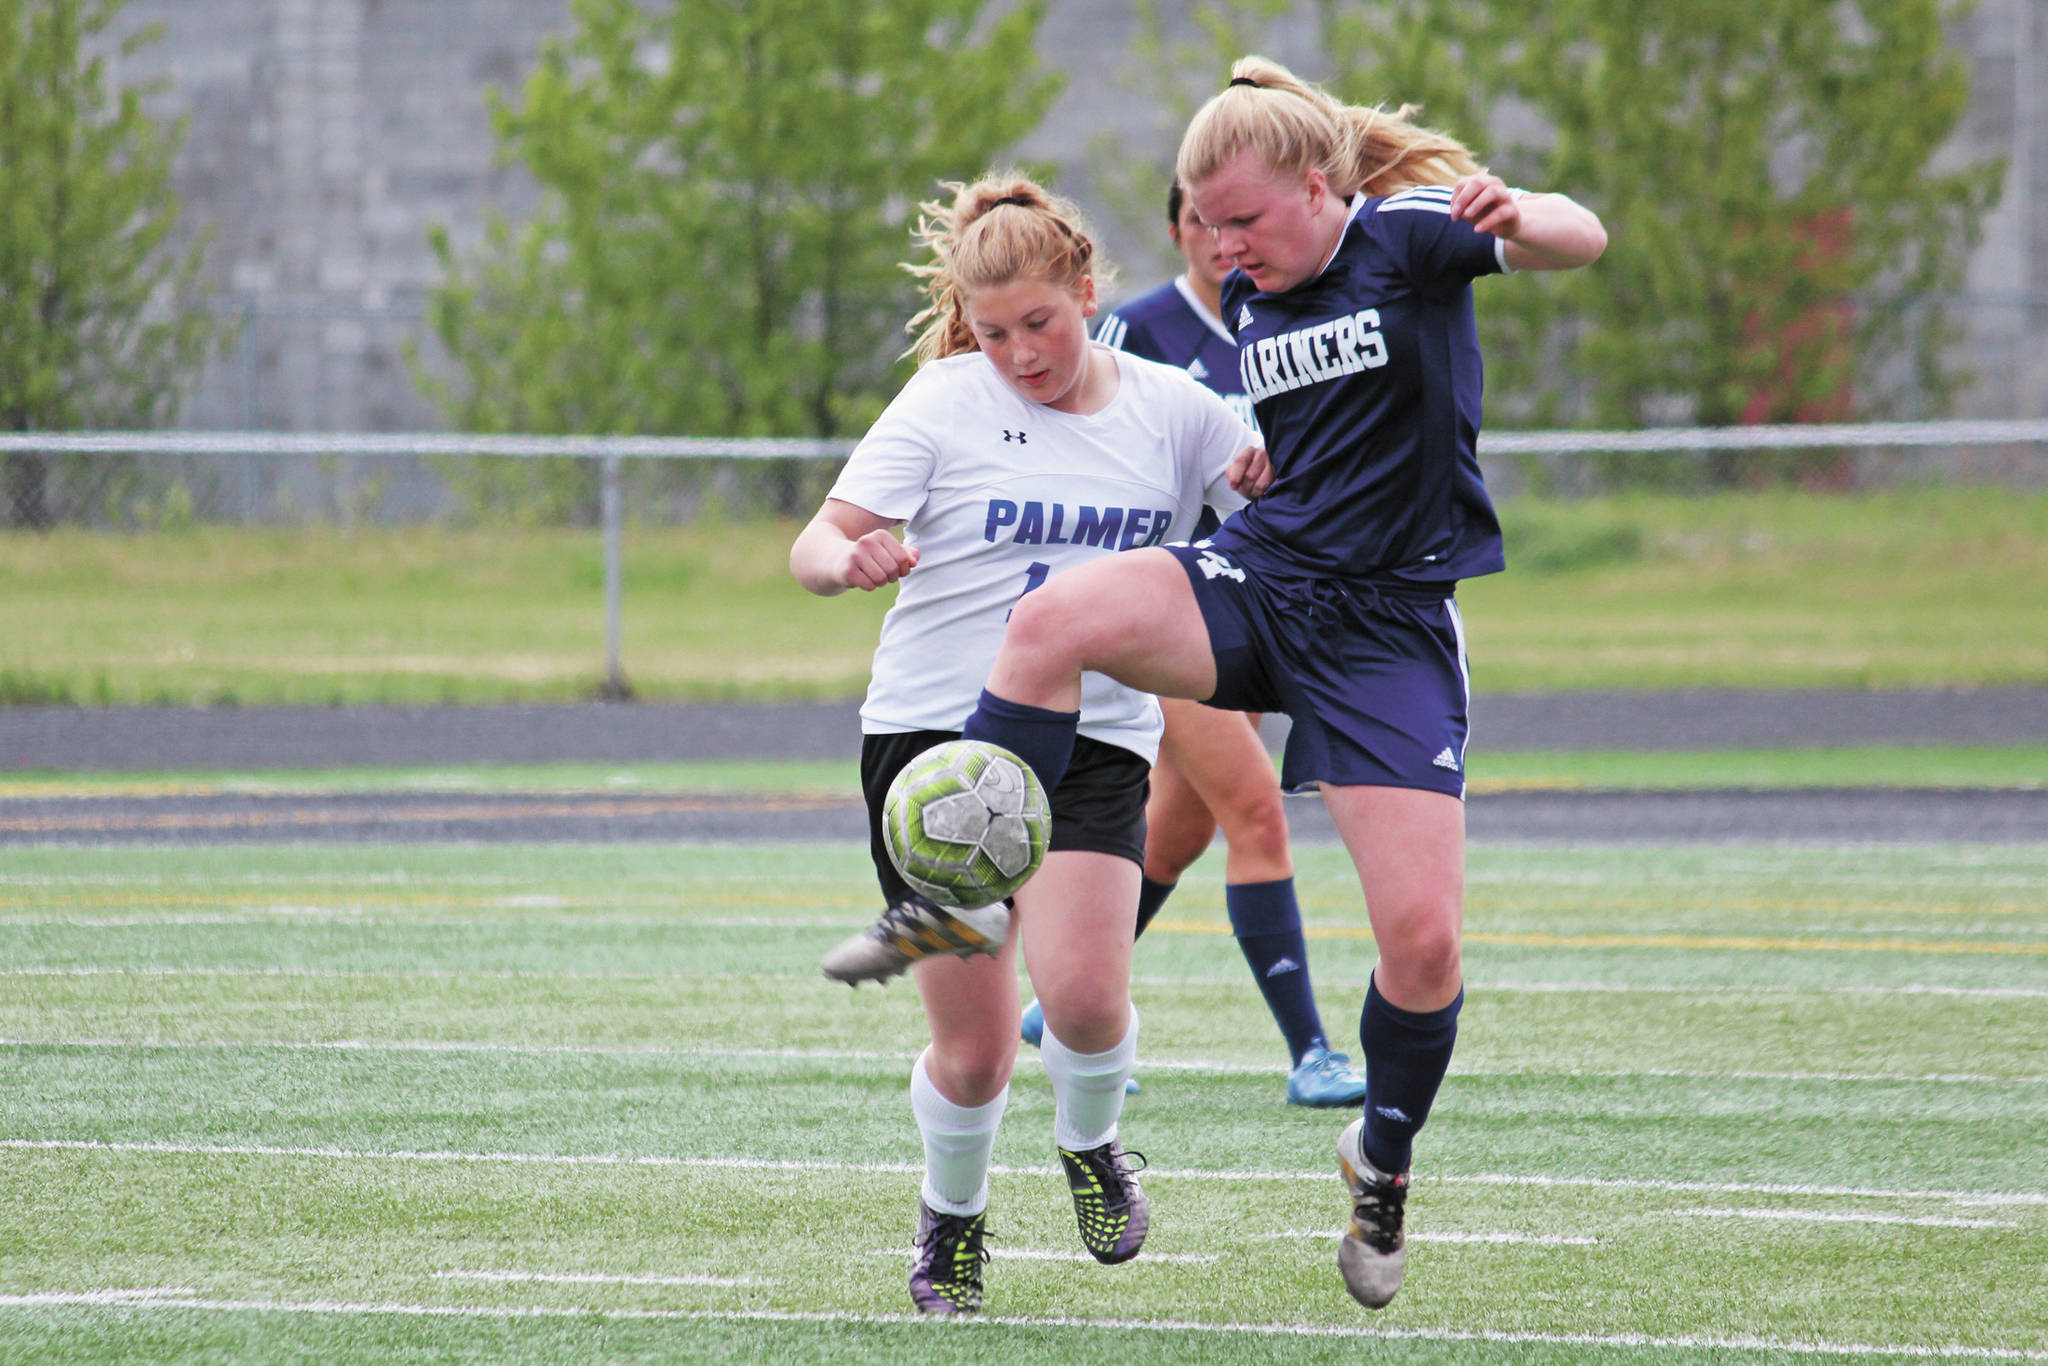 Homer’s Daisy Kettle battles for the ball with Palmer’s Avery Hill in a May 24, 2019 game during the Division II state soccer championship tournament at West Anchorage High School in Anchorage, Alaska. (Photo by Megan Pacer/Homer News)